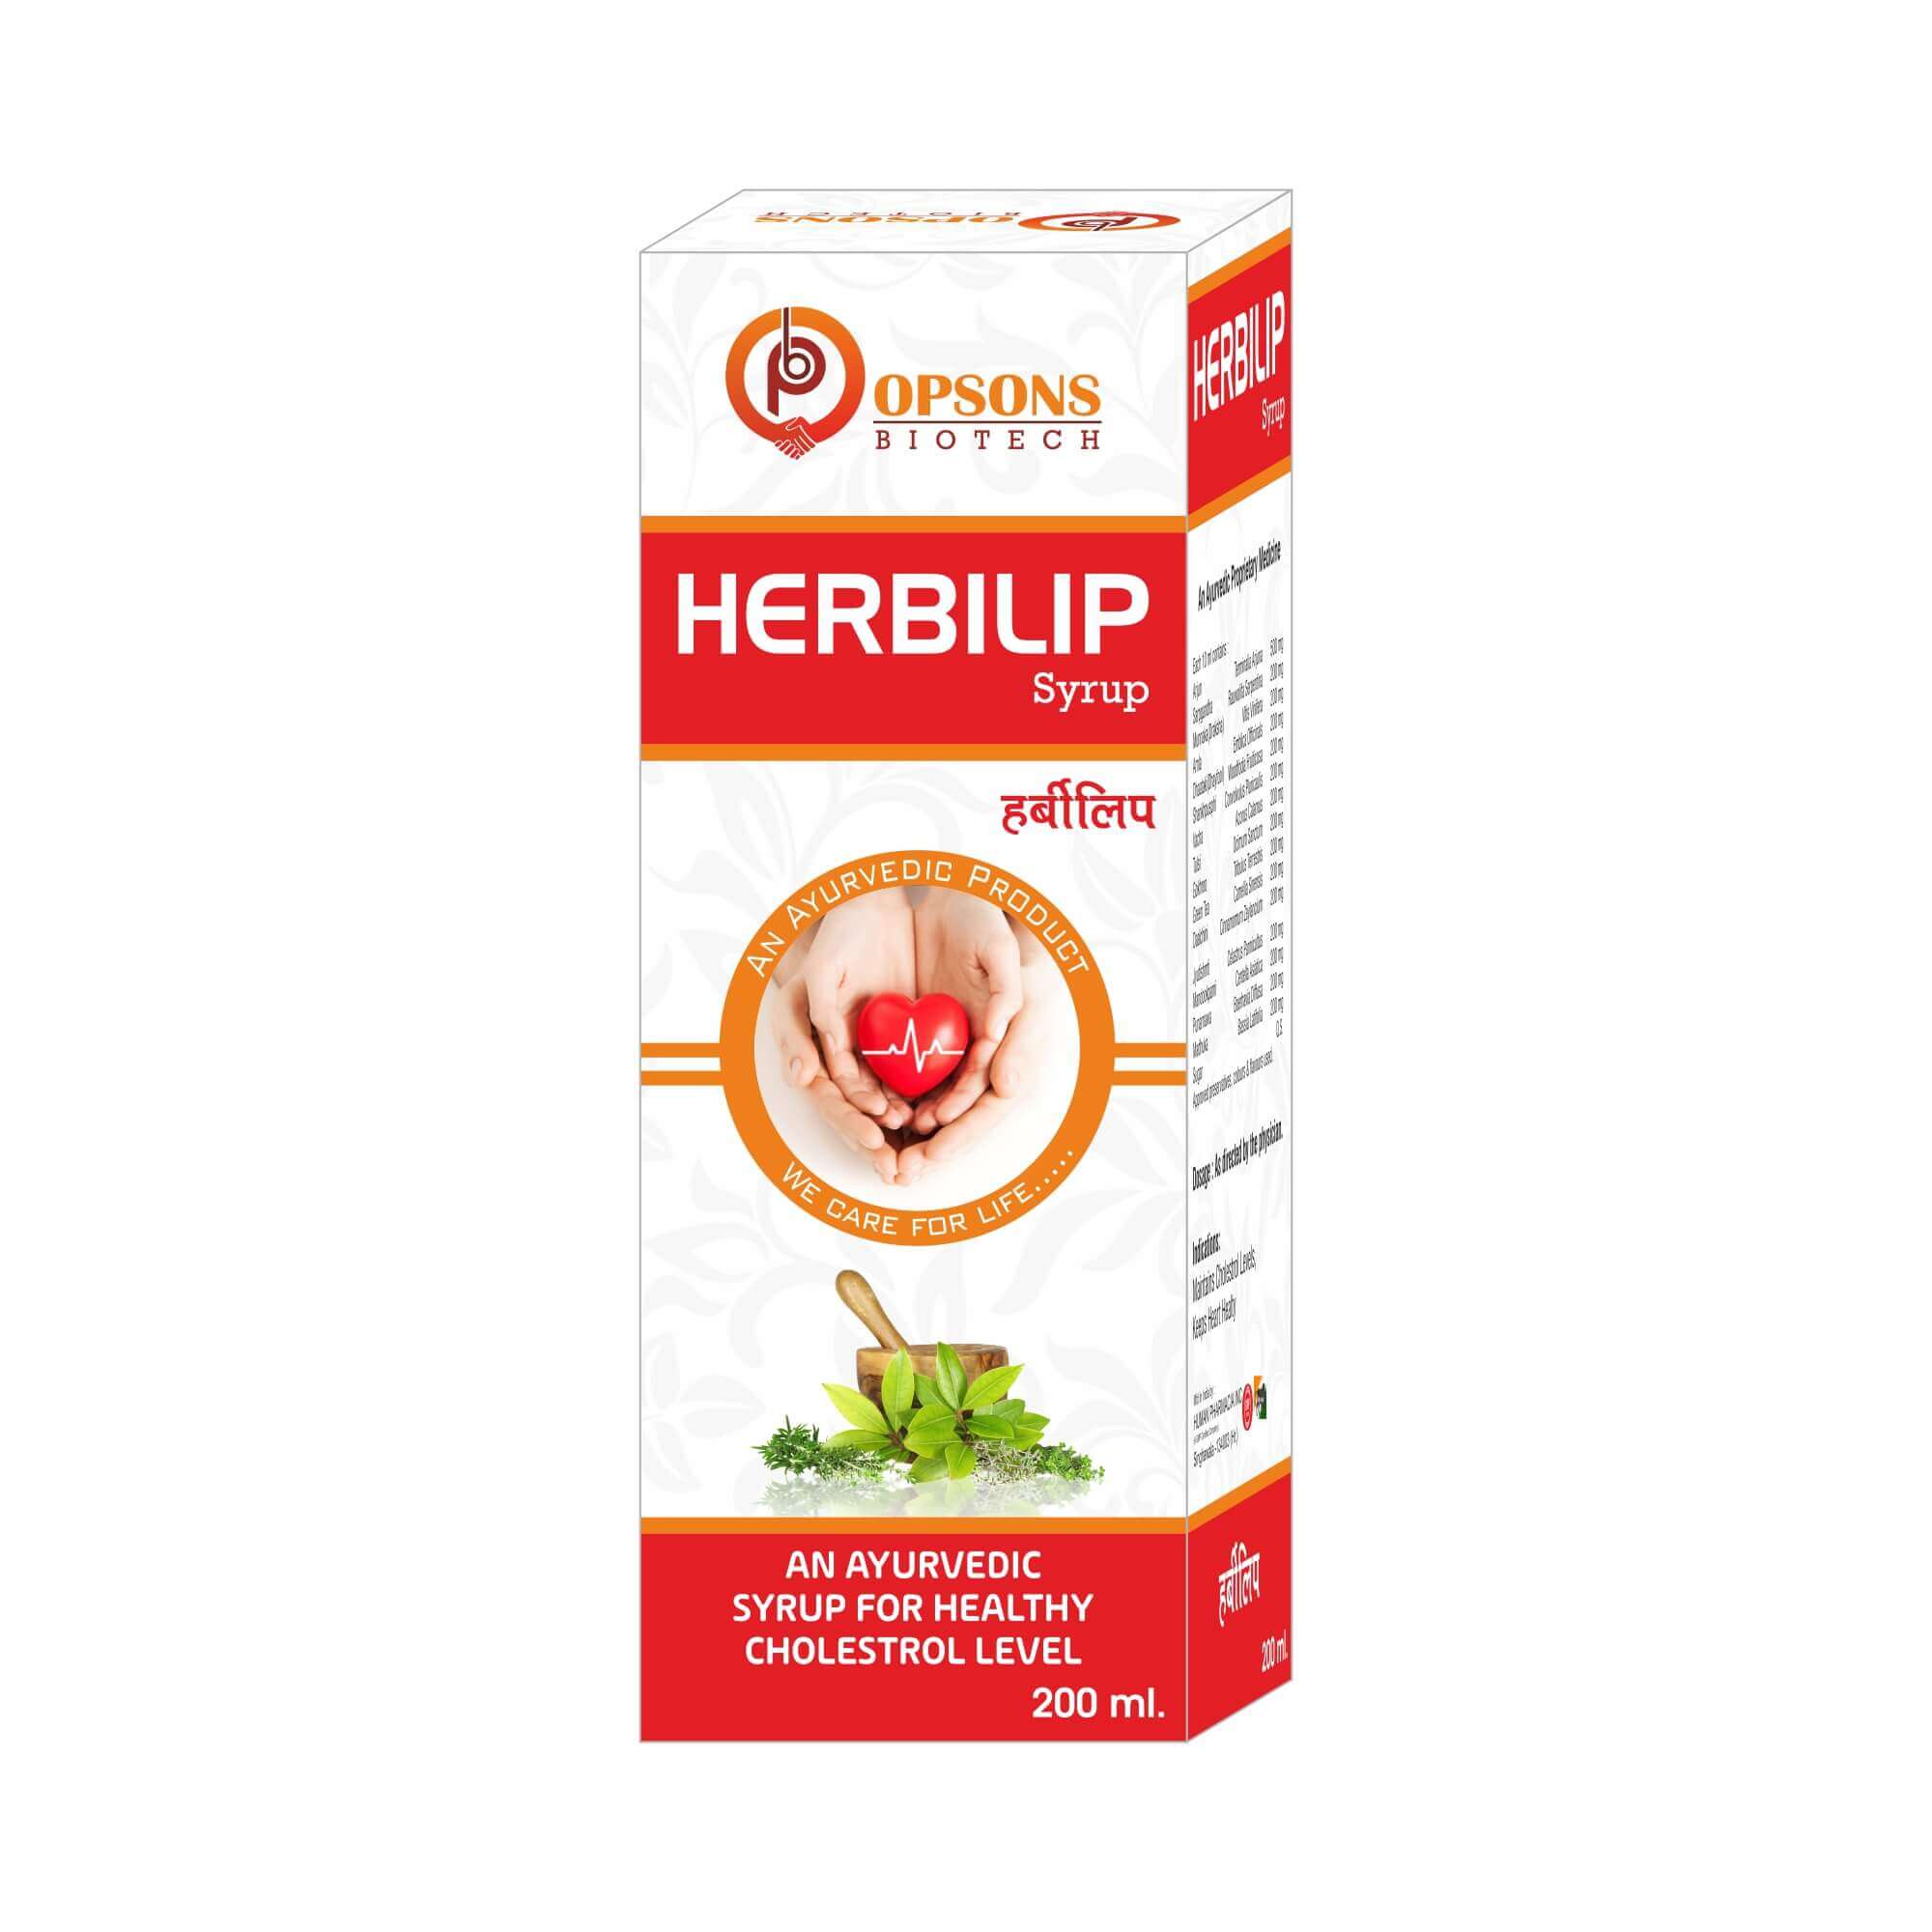 Product Name: Herbilip, Compositions of Herbilip are An Ayurvedic Syrup For Healthy Cholestrol Level - Opsons Biotech